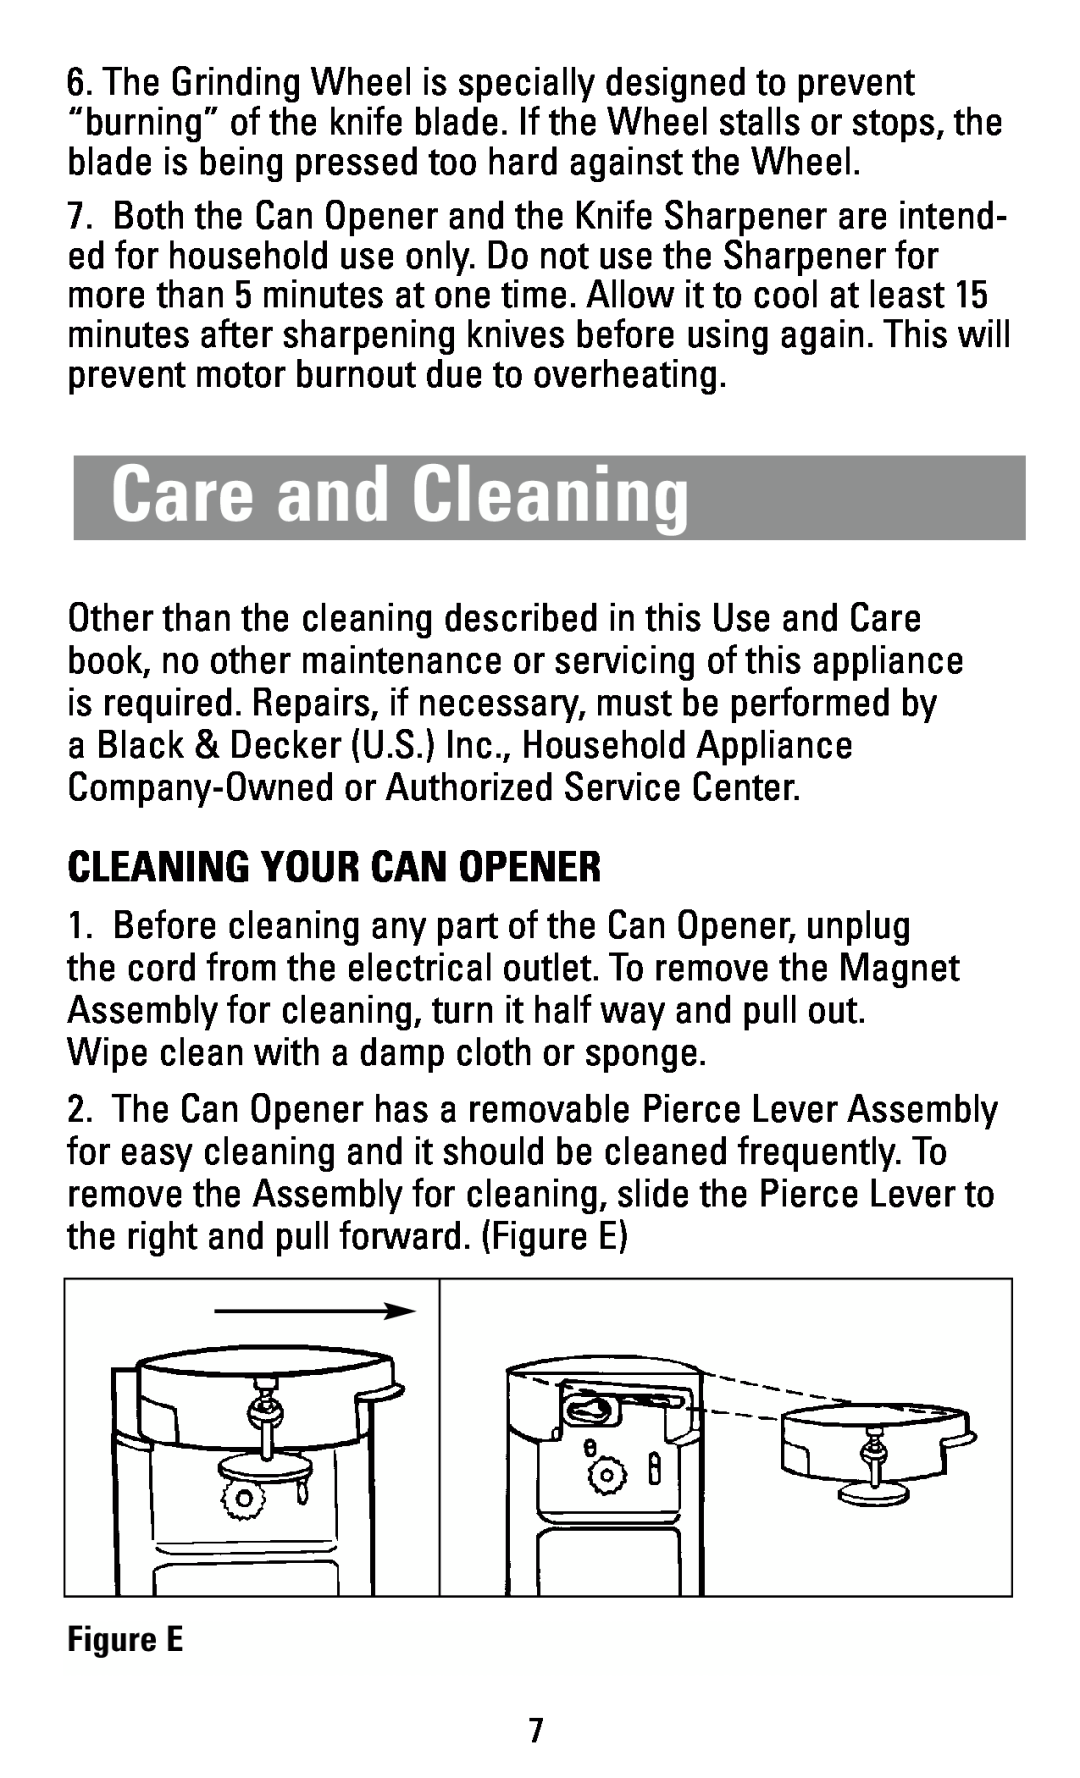 Black & Decker EC42C, EC43B, EC43 manual Care and Cleaning, Cleaning Your Can Opener 